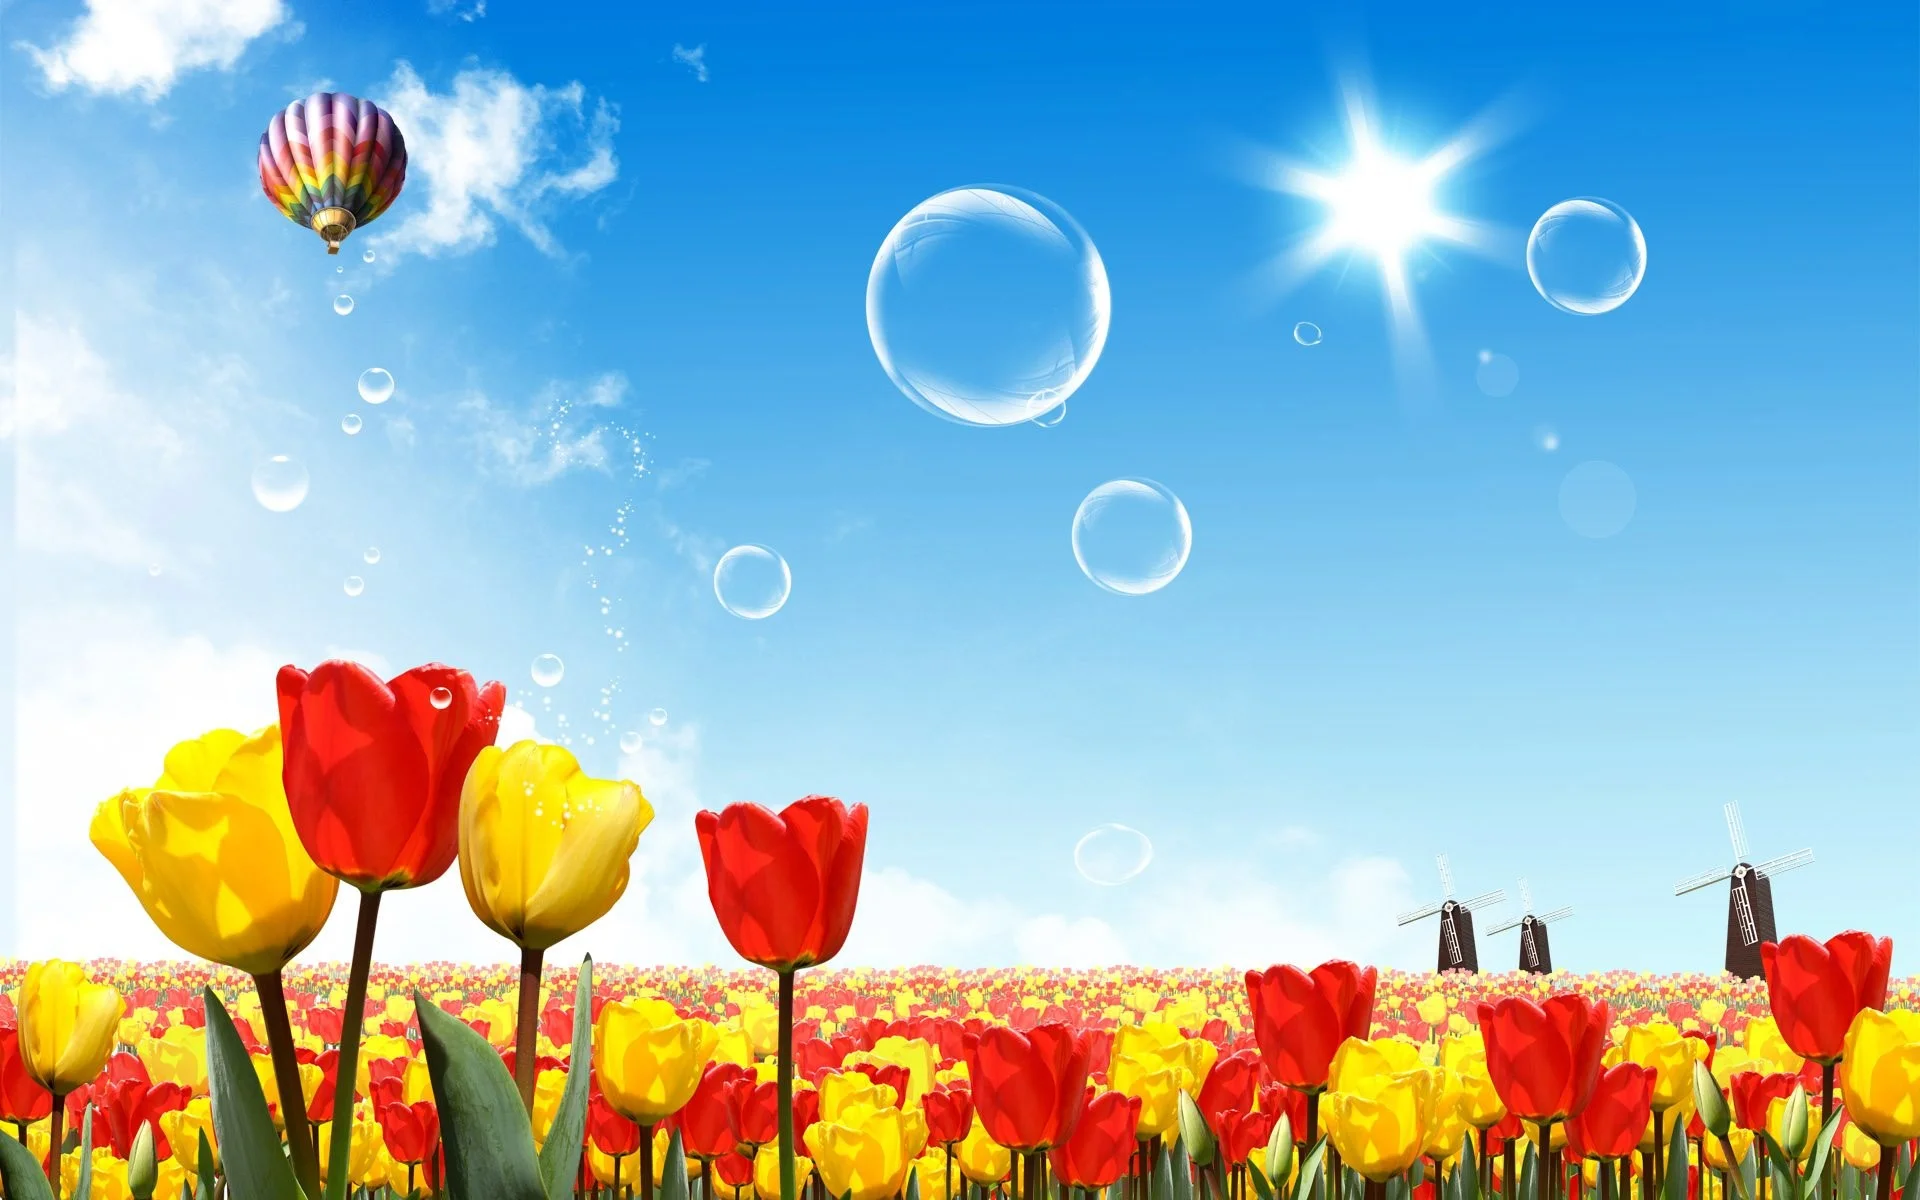 Most beautiful colorfull flowers airbaloon picture wallpaper screensaver